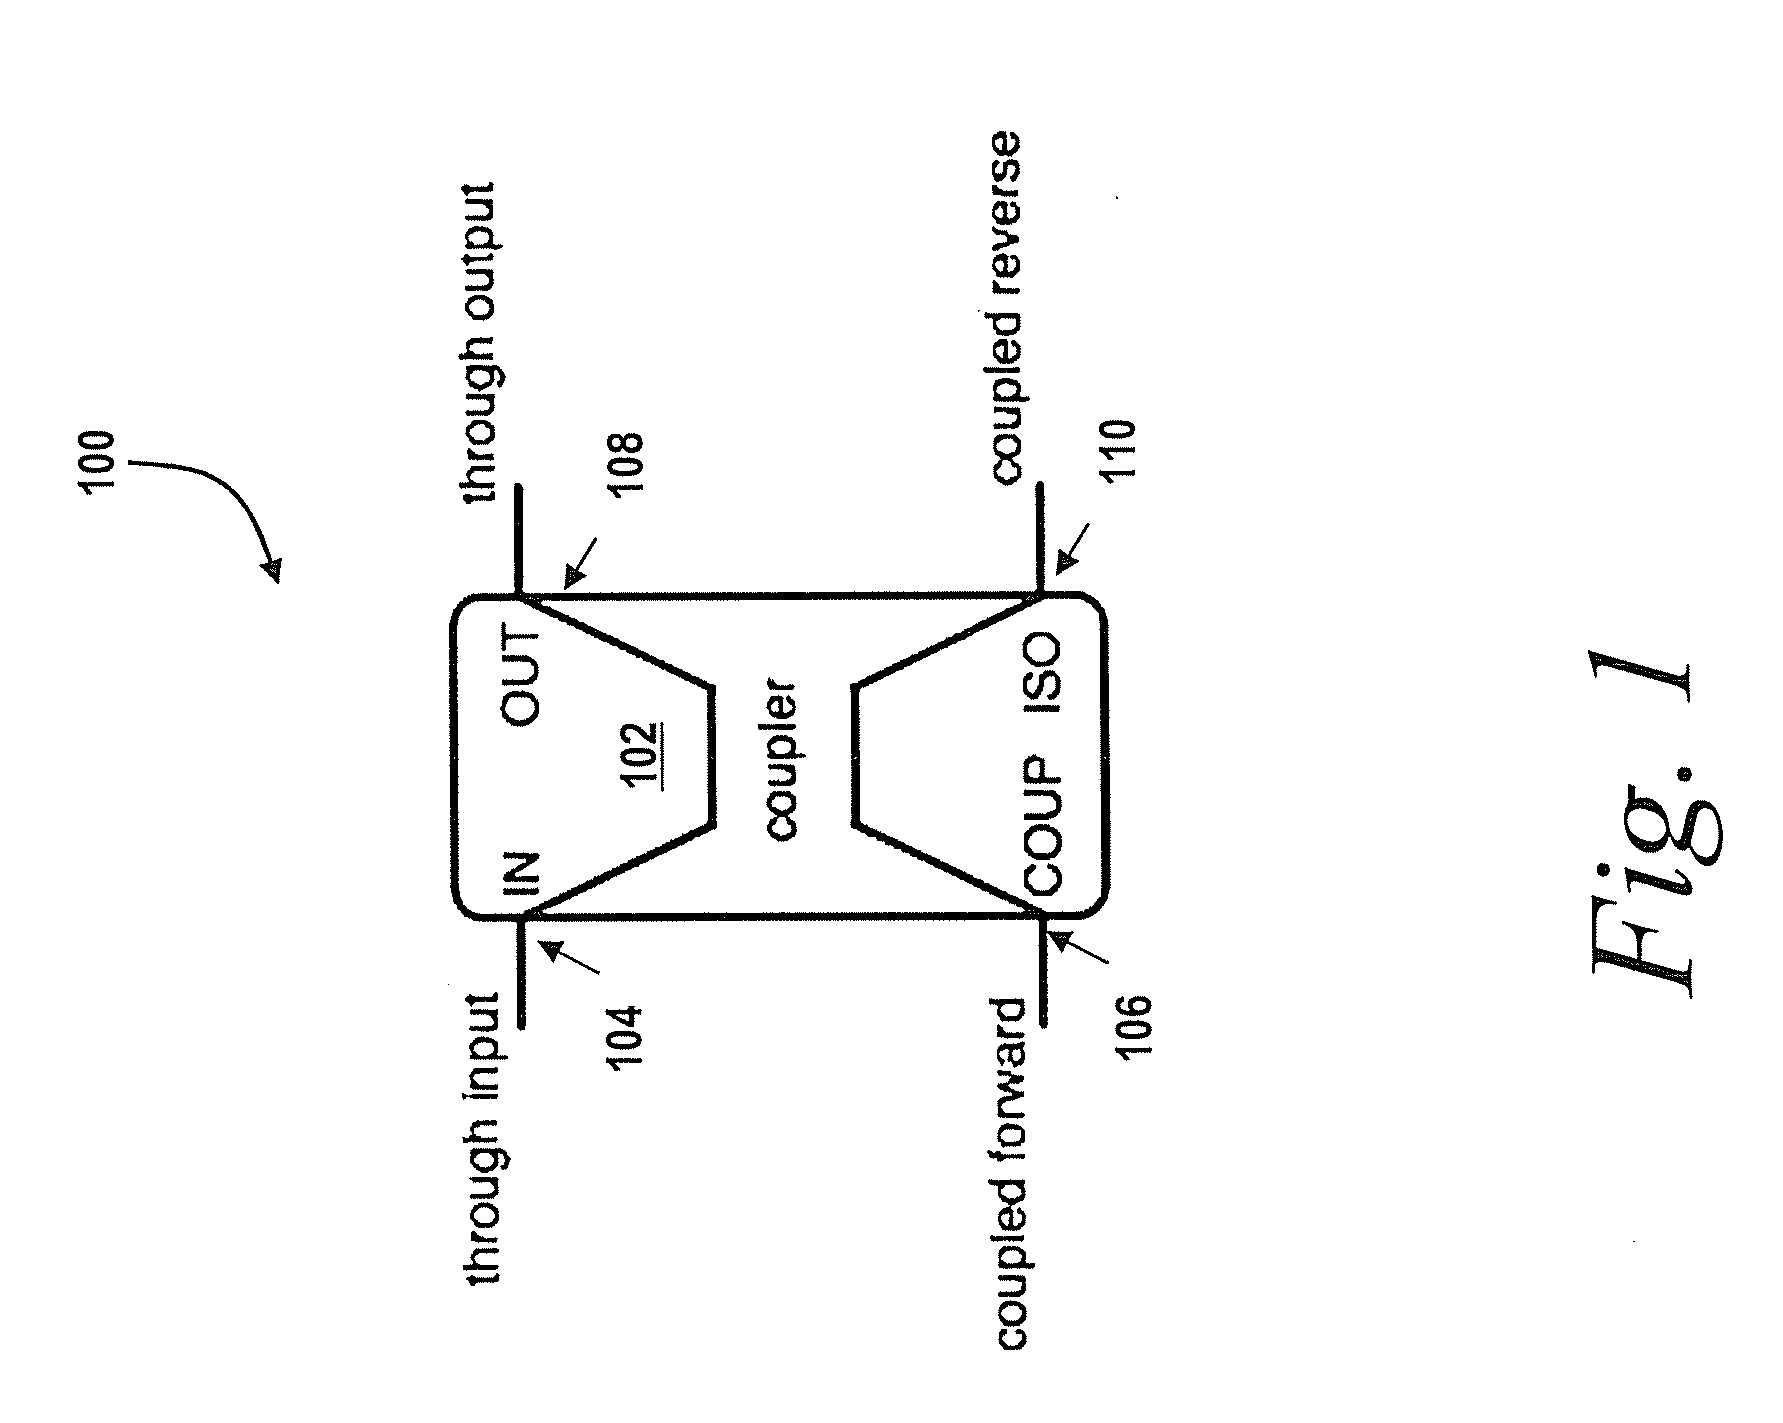 Methods and Apparatus For Self-Jamming Suppression In A Radio Frequency Identification (RFID) Reader